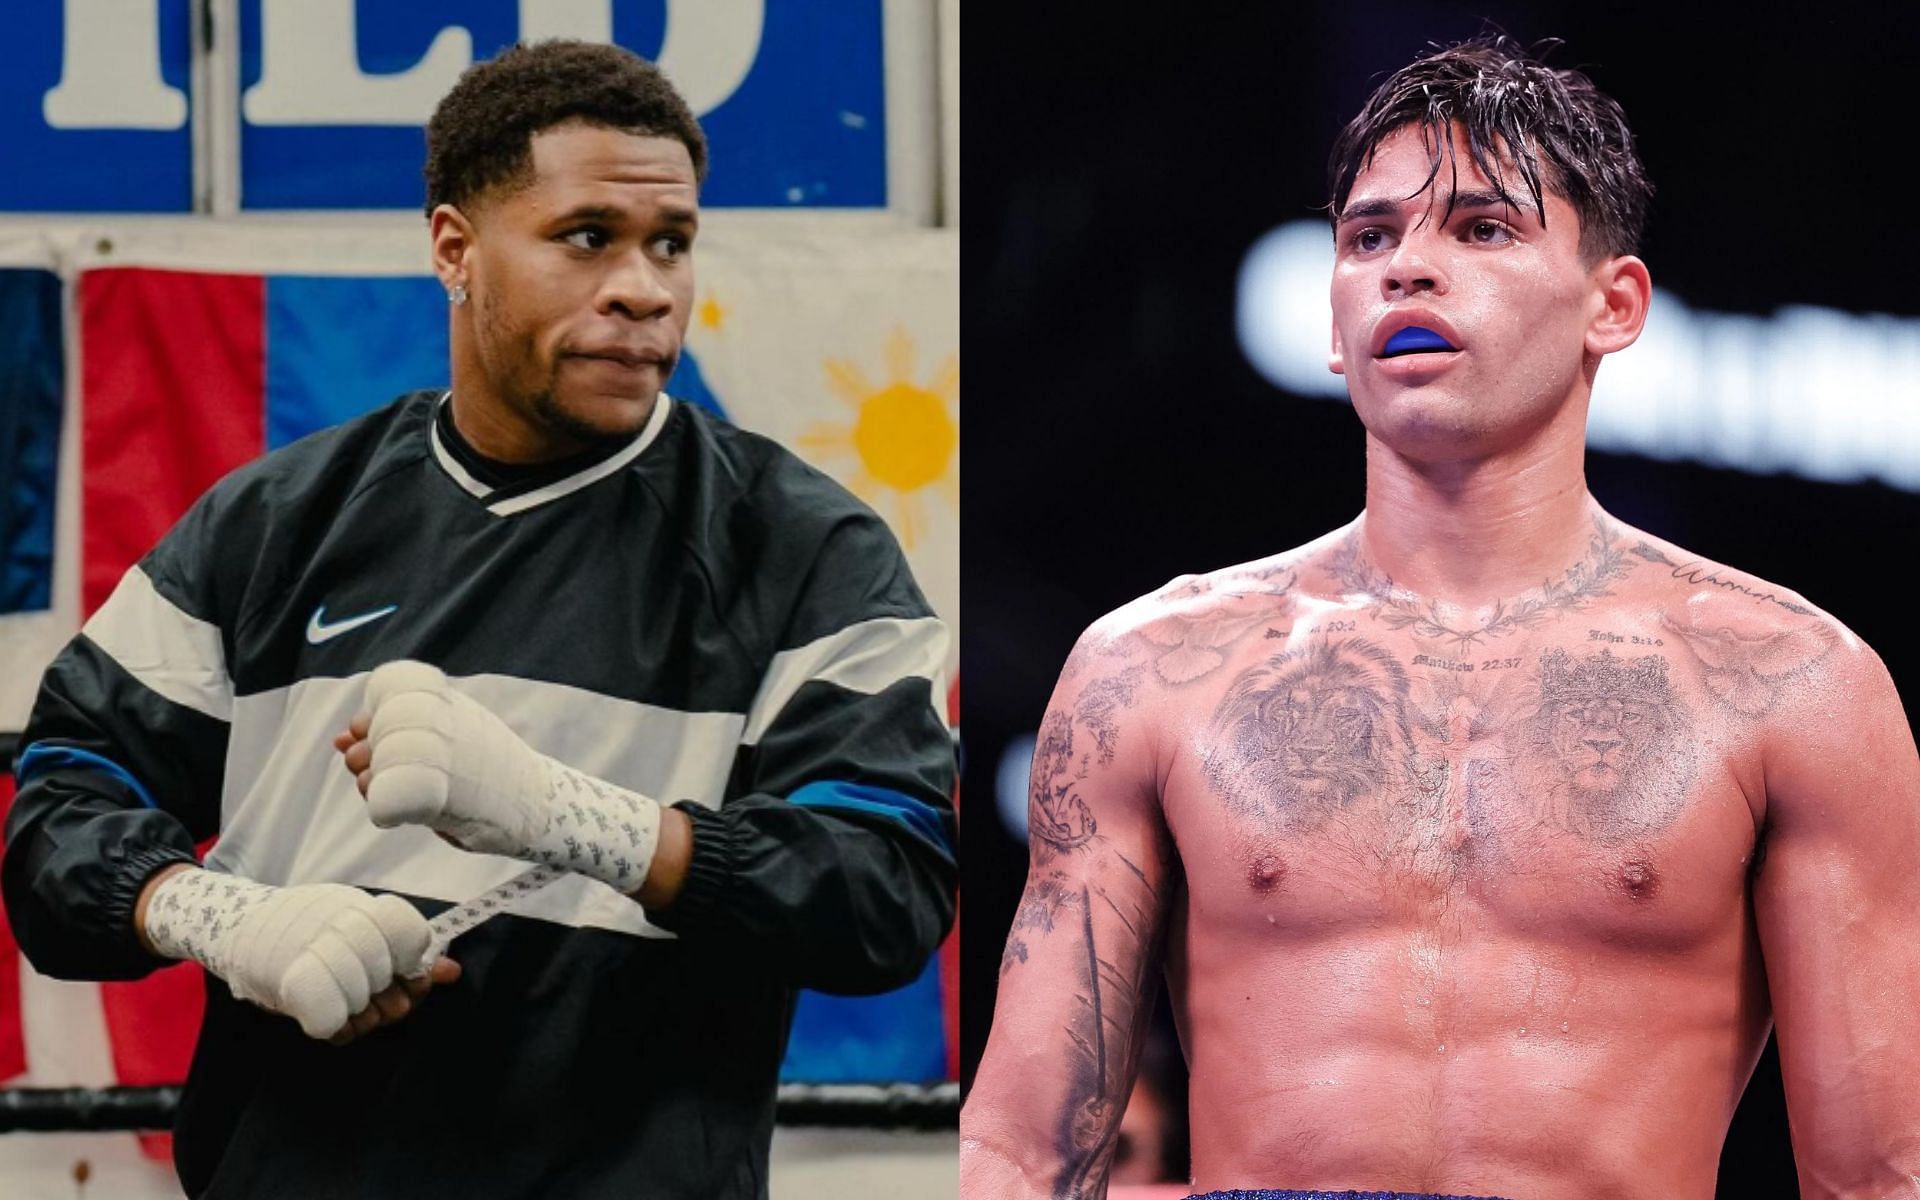 Devin Haney (left) is unimpressed with Ryan Garcia (right) smoking weed almost a month out from their fight [Images Courtesy: @GettyImages and @devinhaney on Instagram]